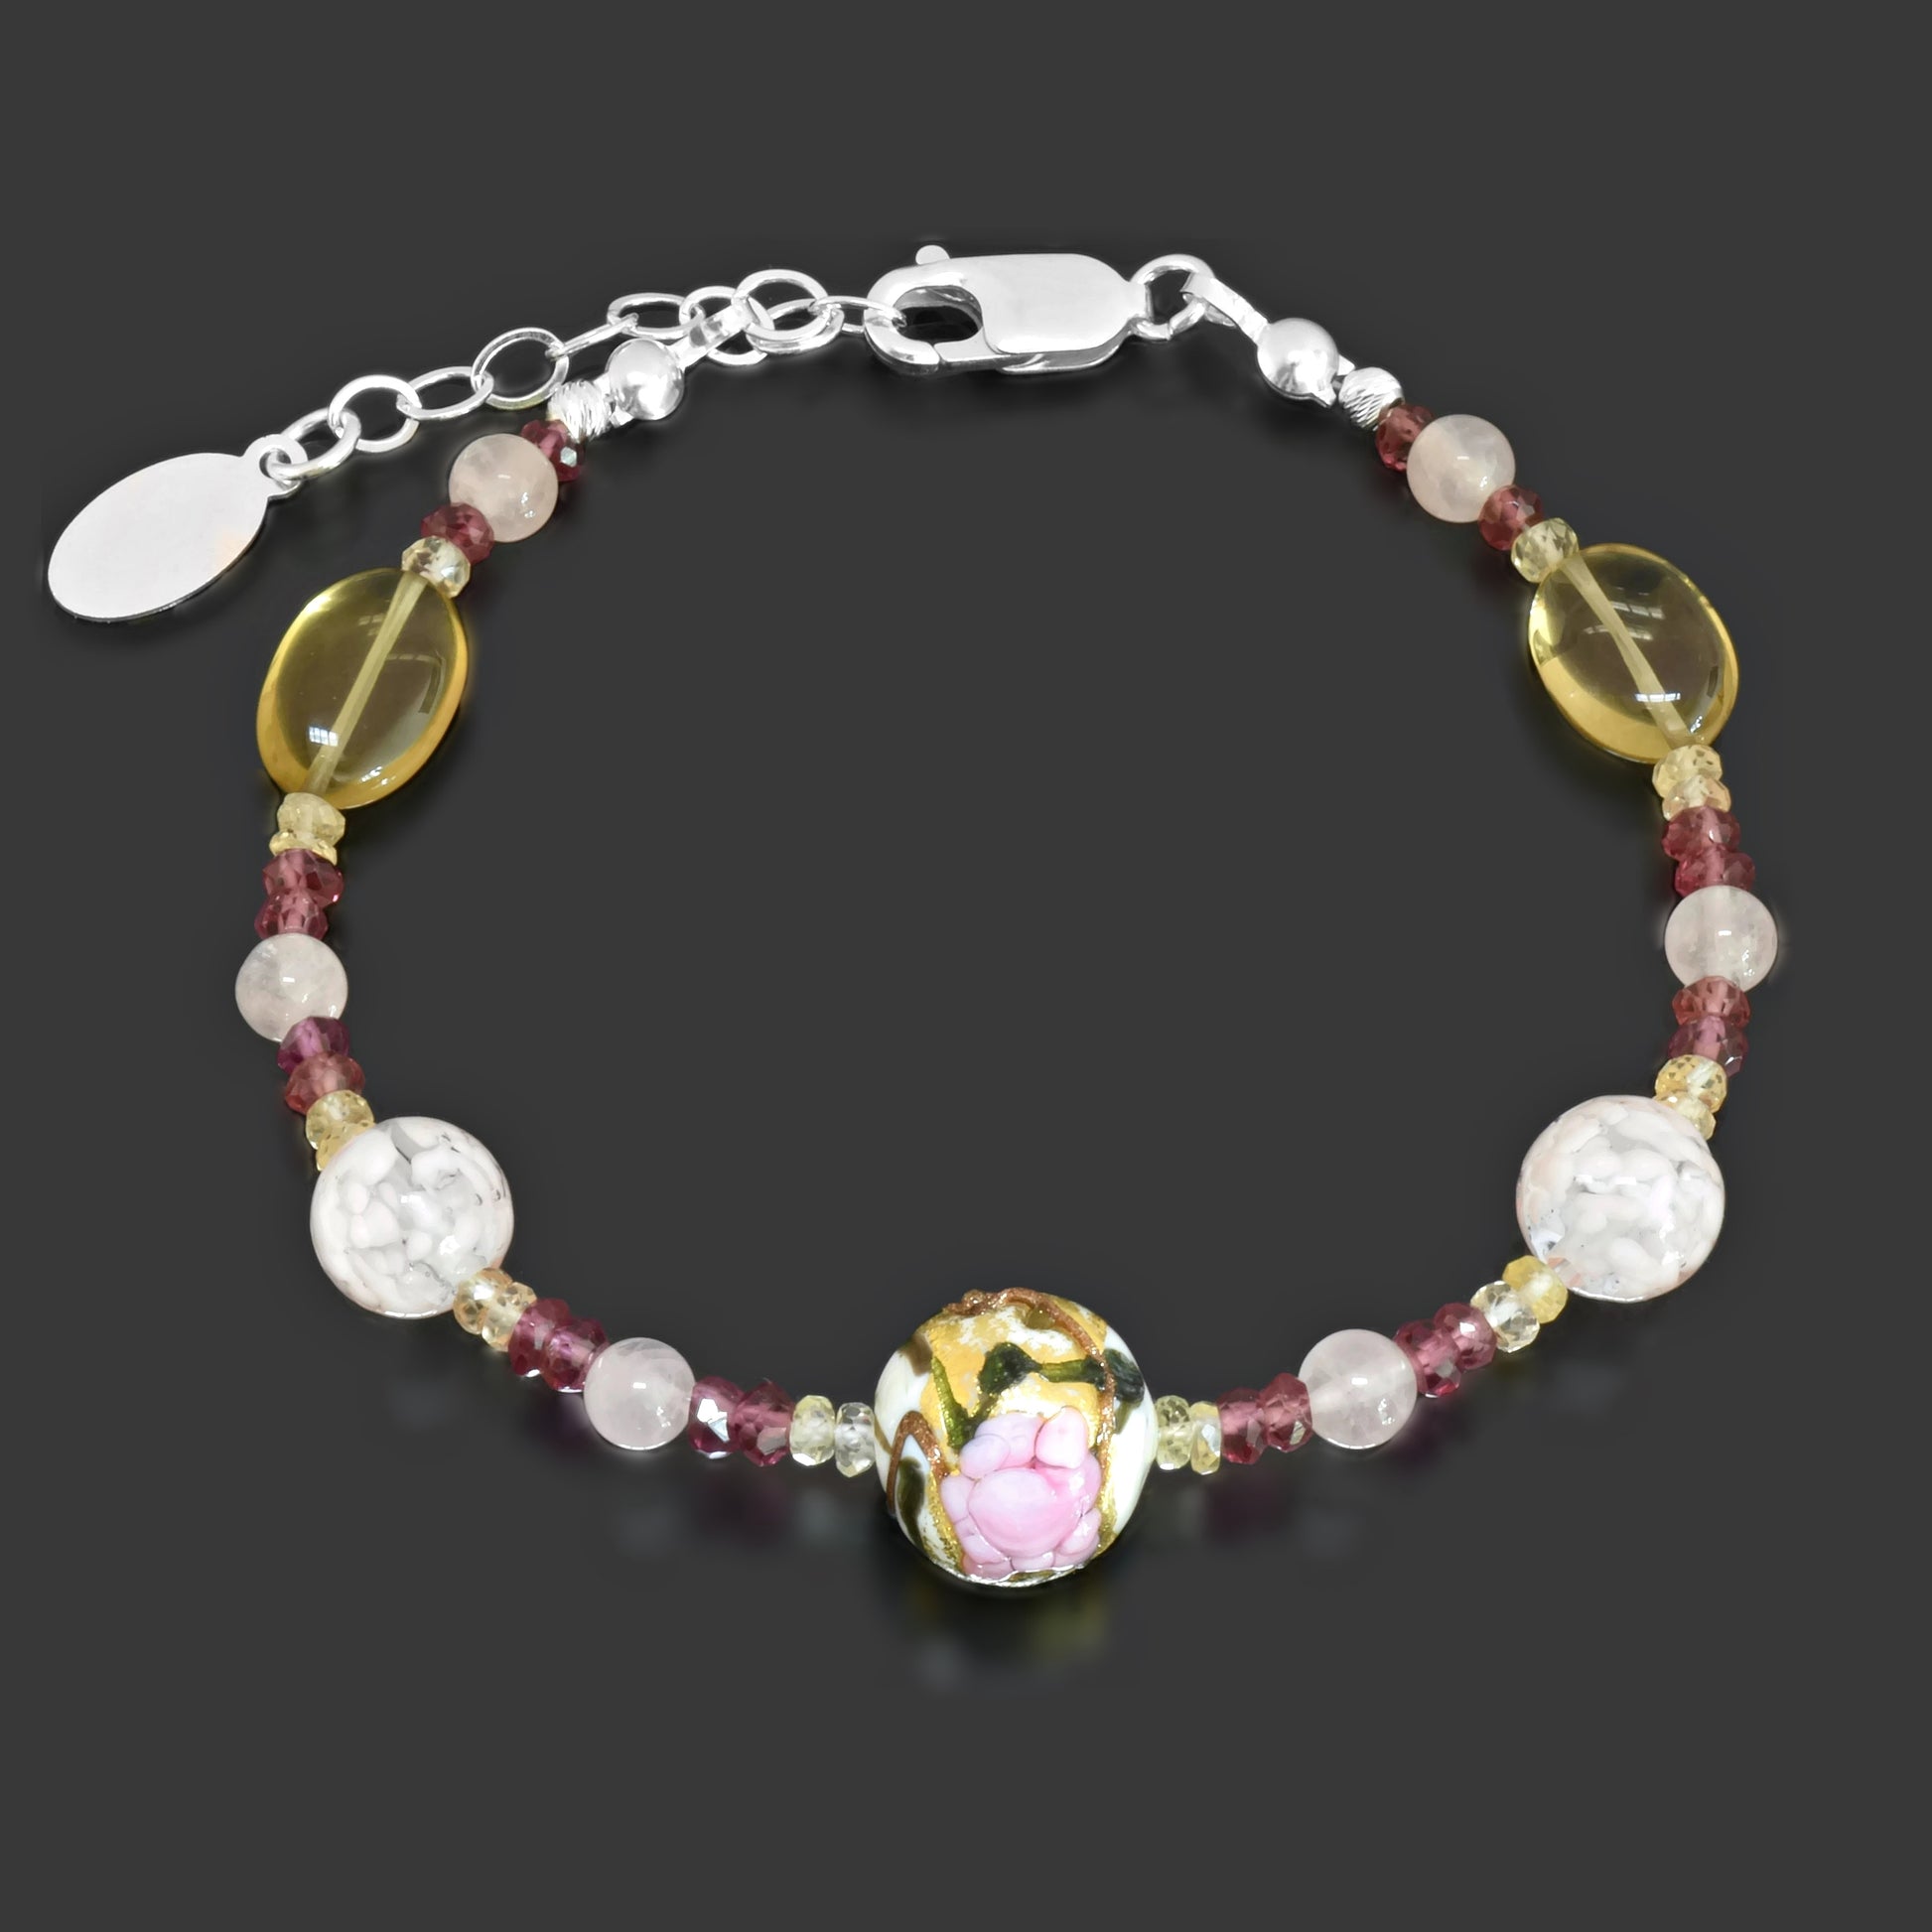 Gold & Pink Floral Murano Bead Bracelet with Rose & Champagne Quartz Sterling Silver 6"